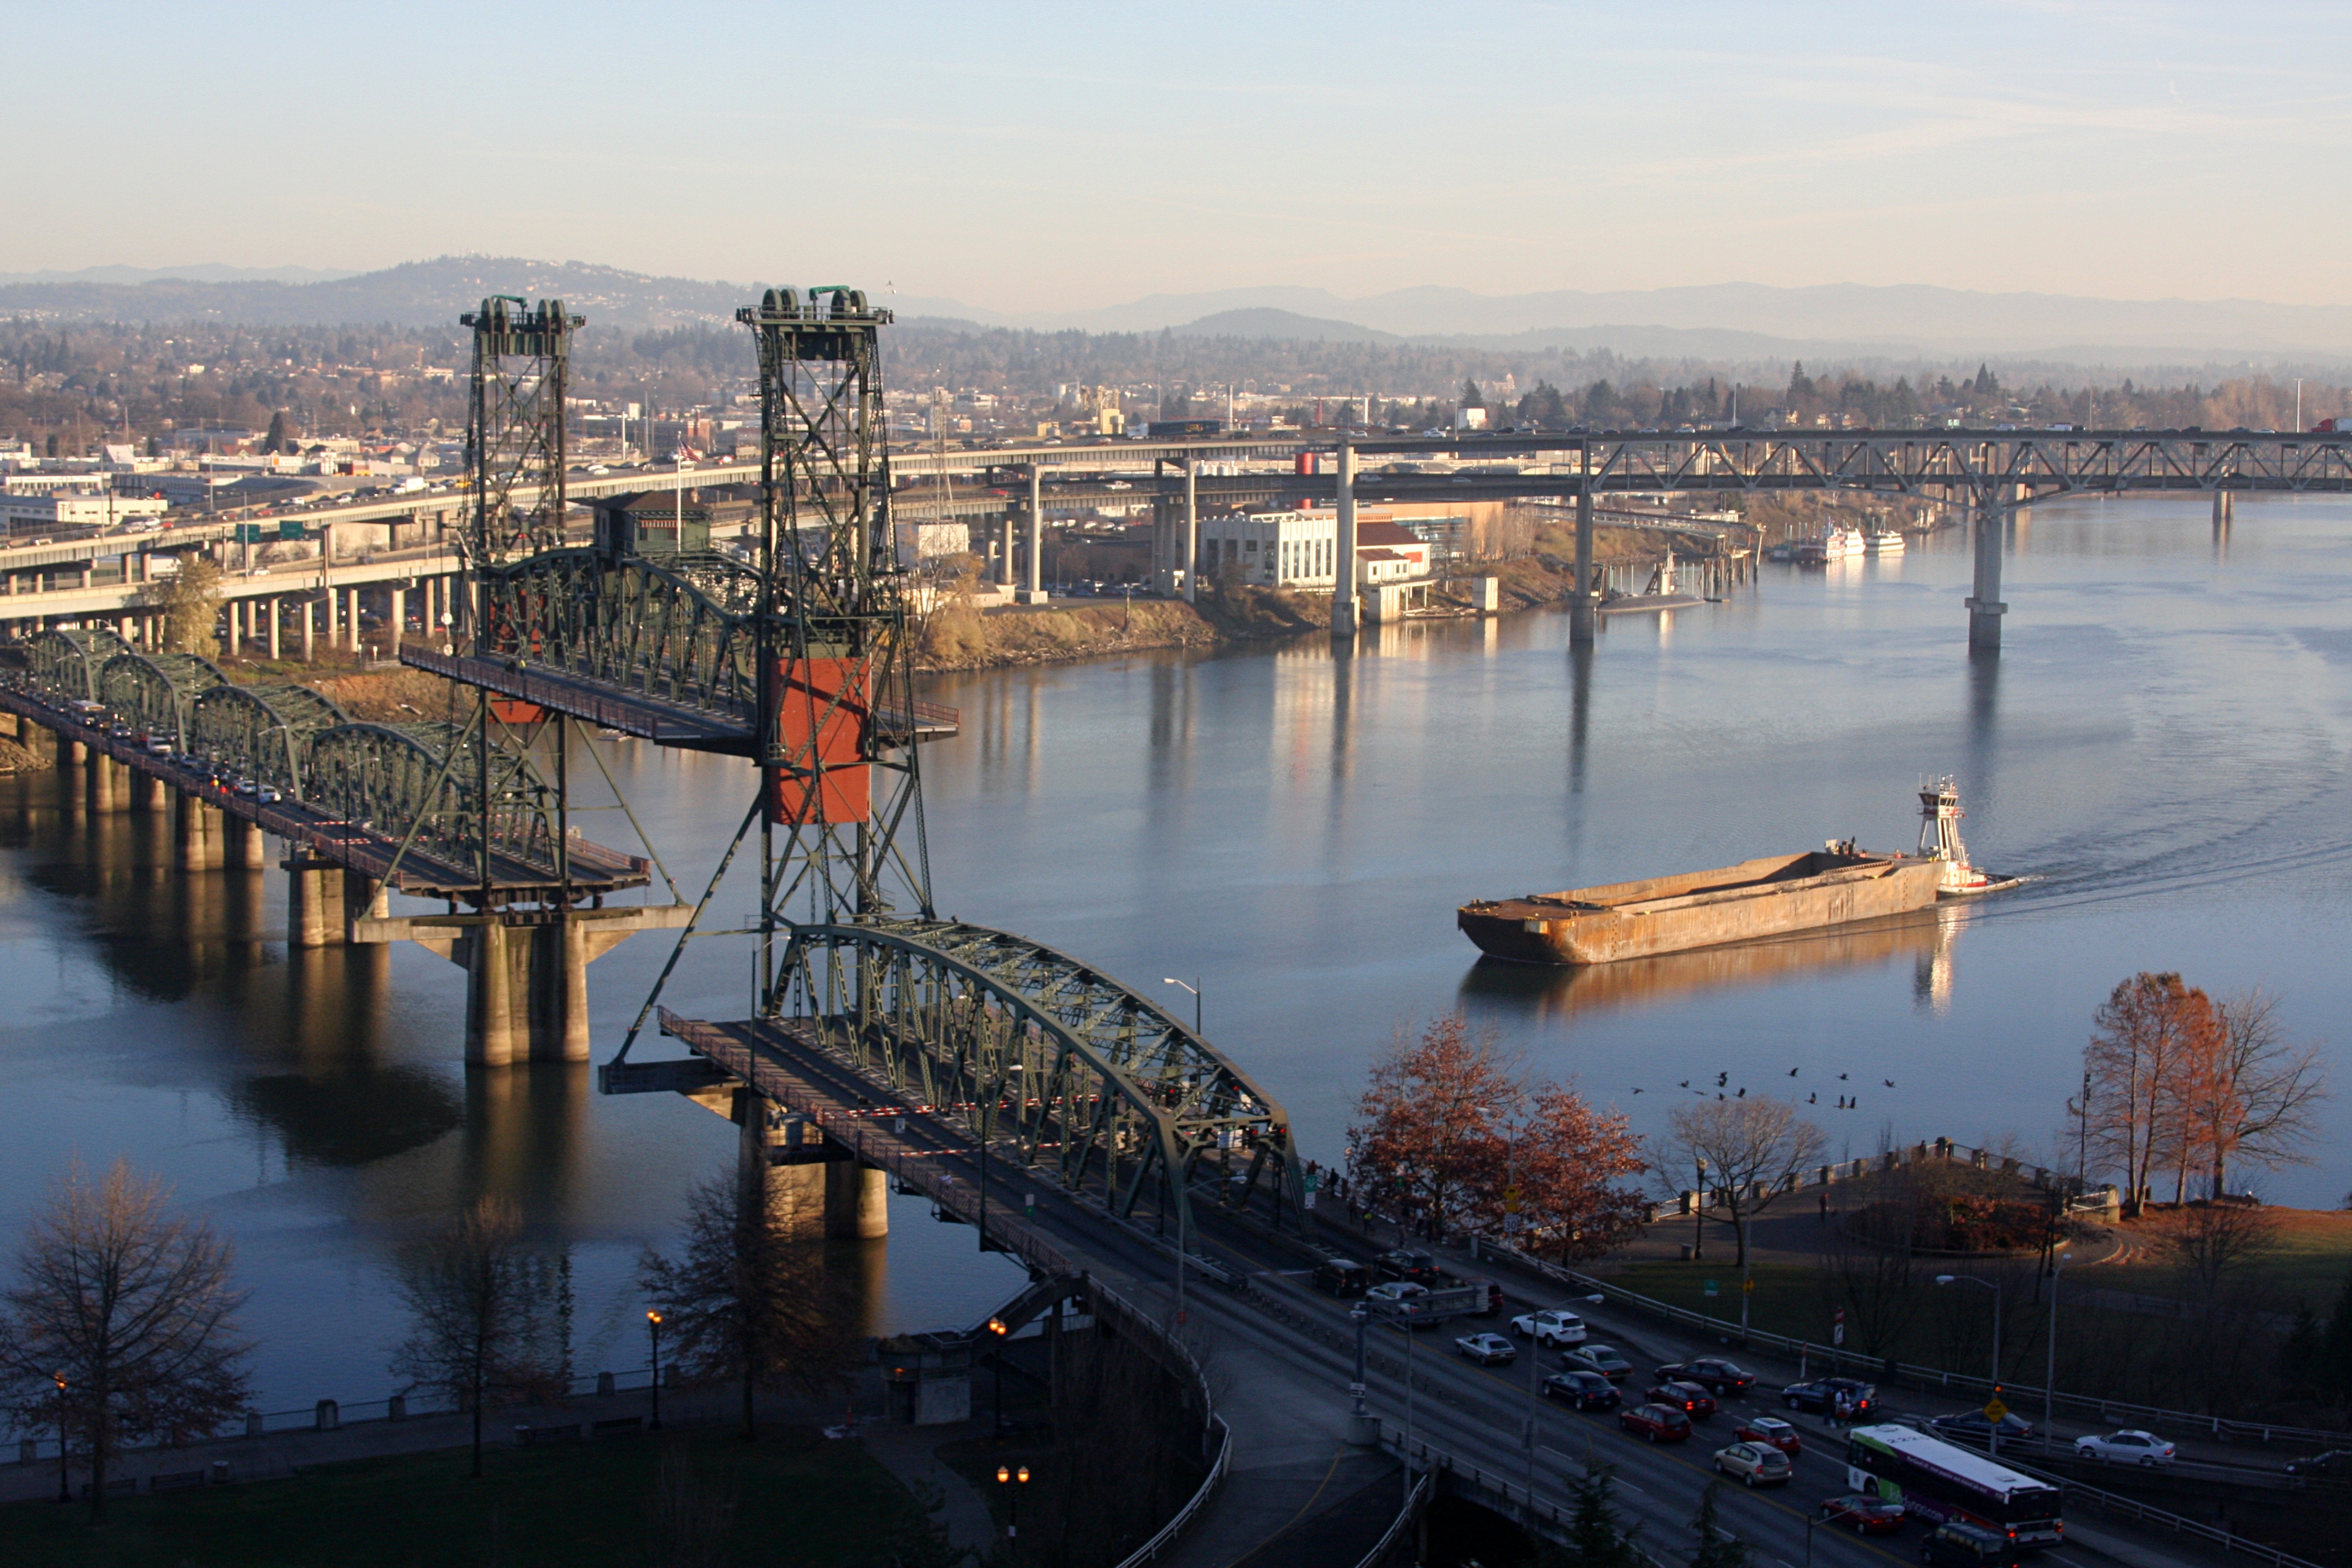 Tug & barge, willamette river -a